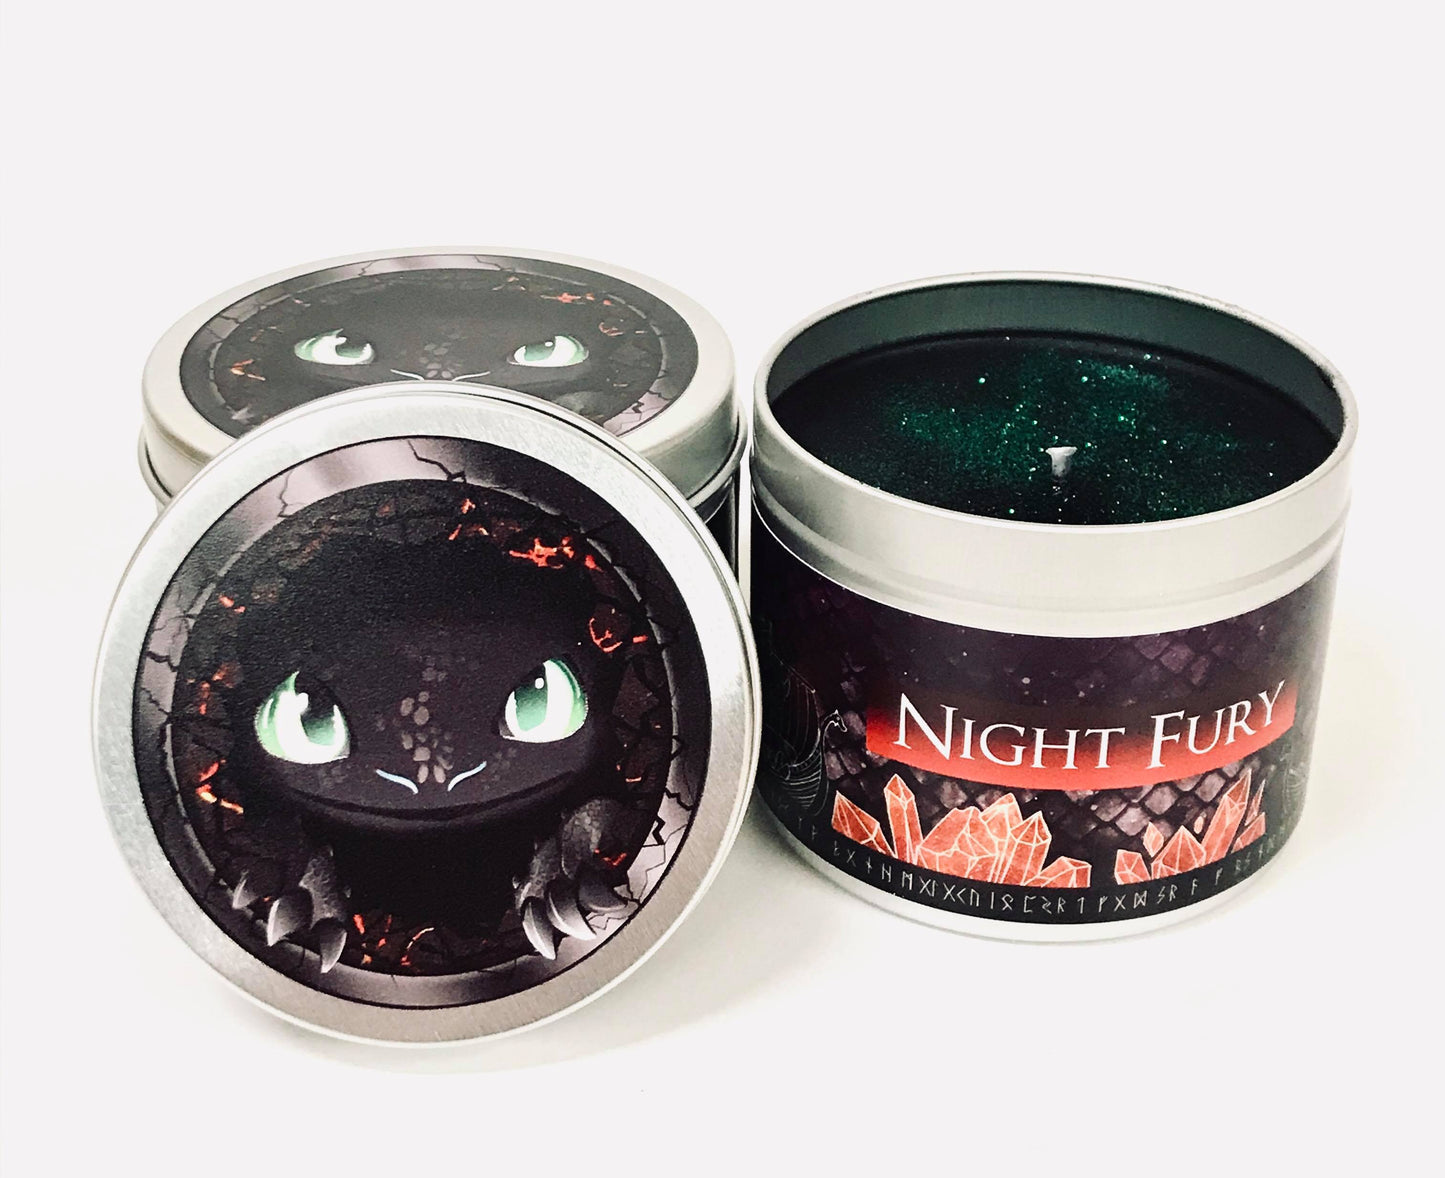 Night fury scented candle with its lid off, black wax and green glitter.